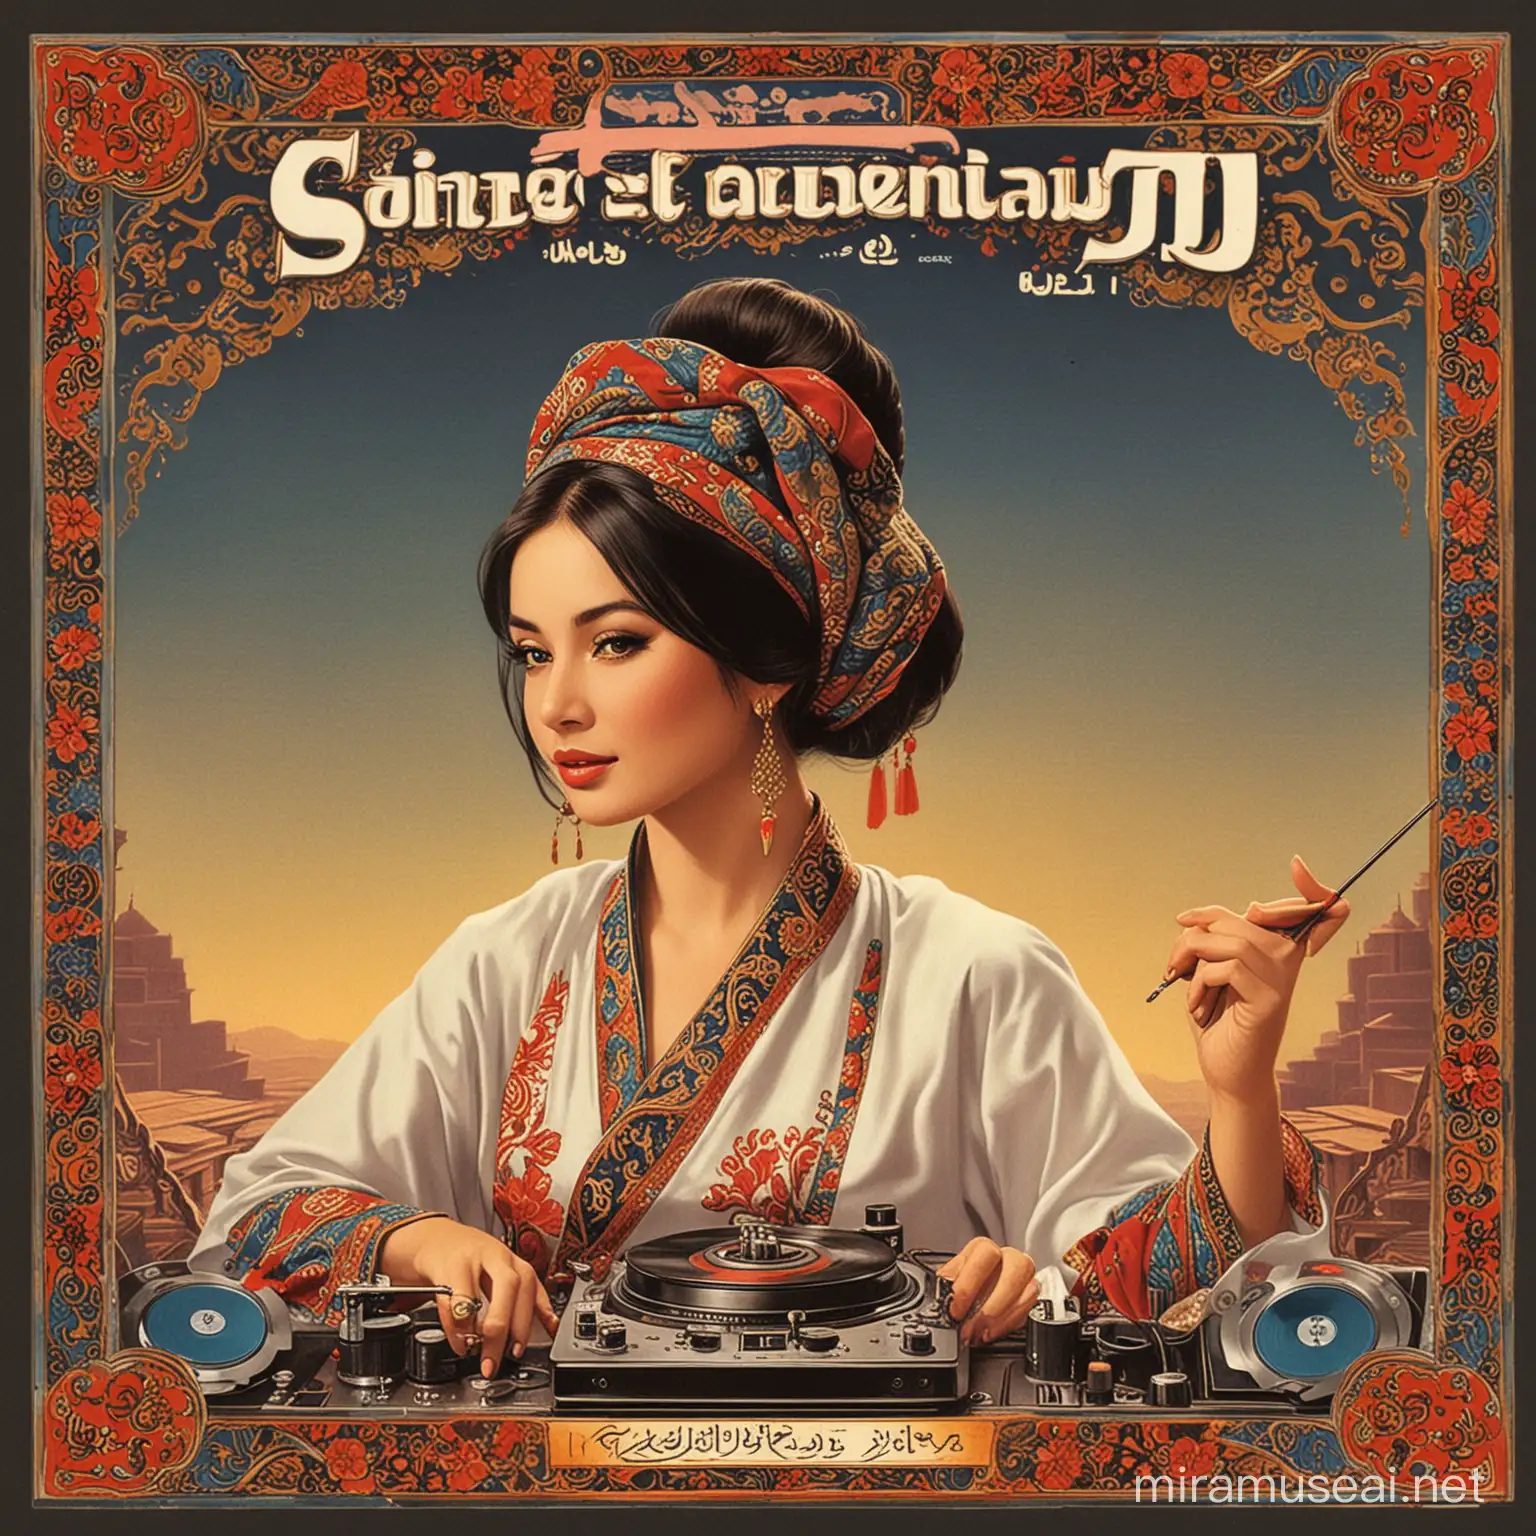 Album cover for the song of an oriental DJ